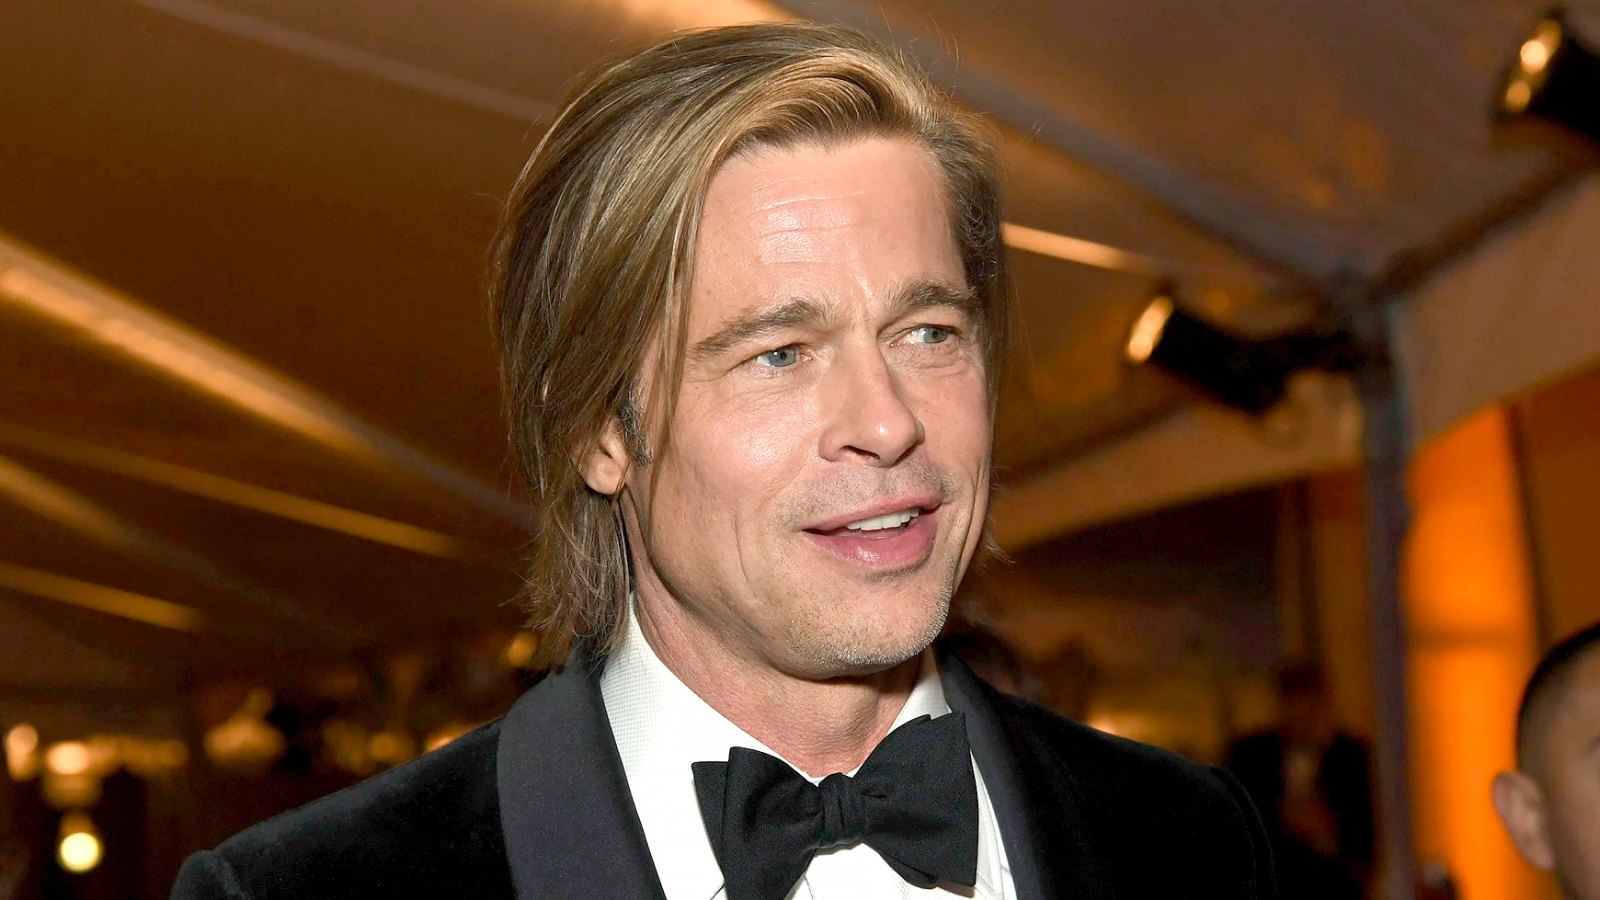 Brad Pitt Skipped 2020 BAFTAs to Be With Daughter During Her Surgery